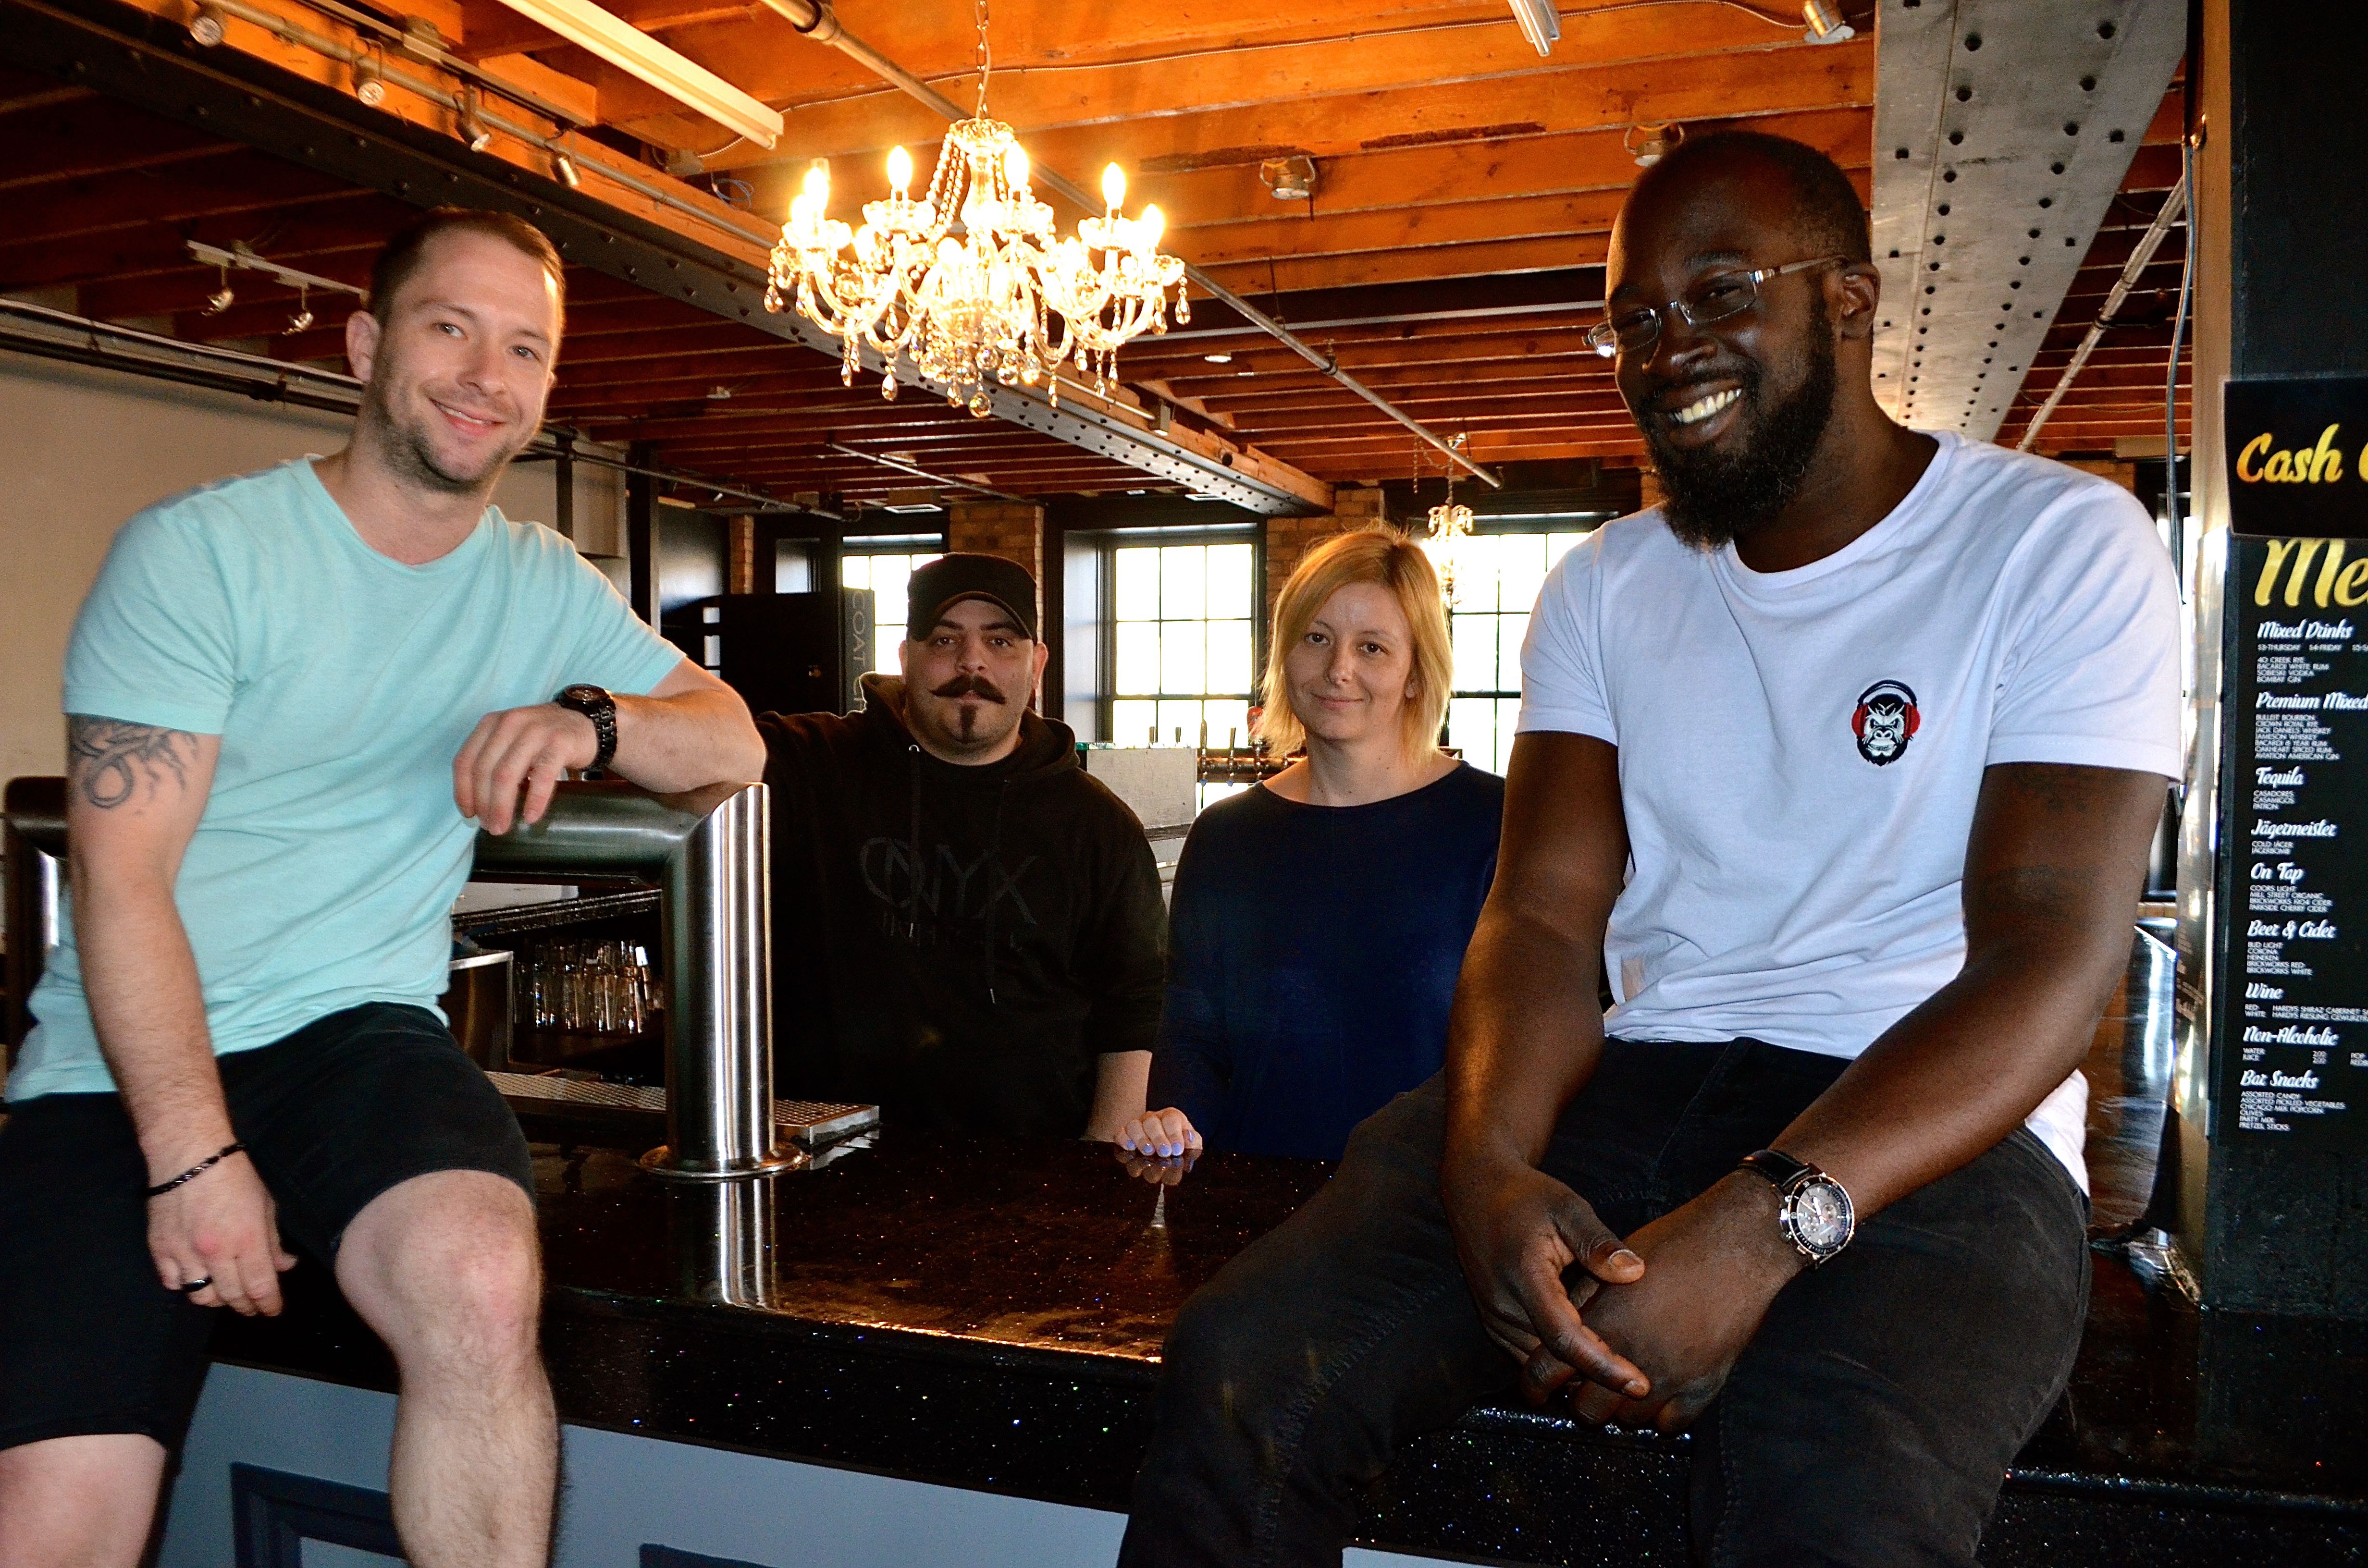 New nightclub crew is mixing business with pleasure pic